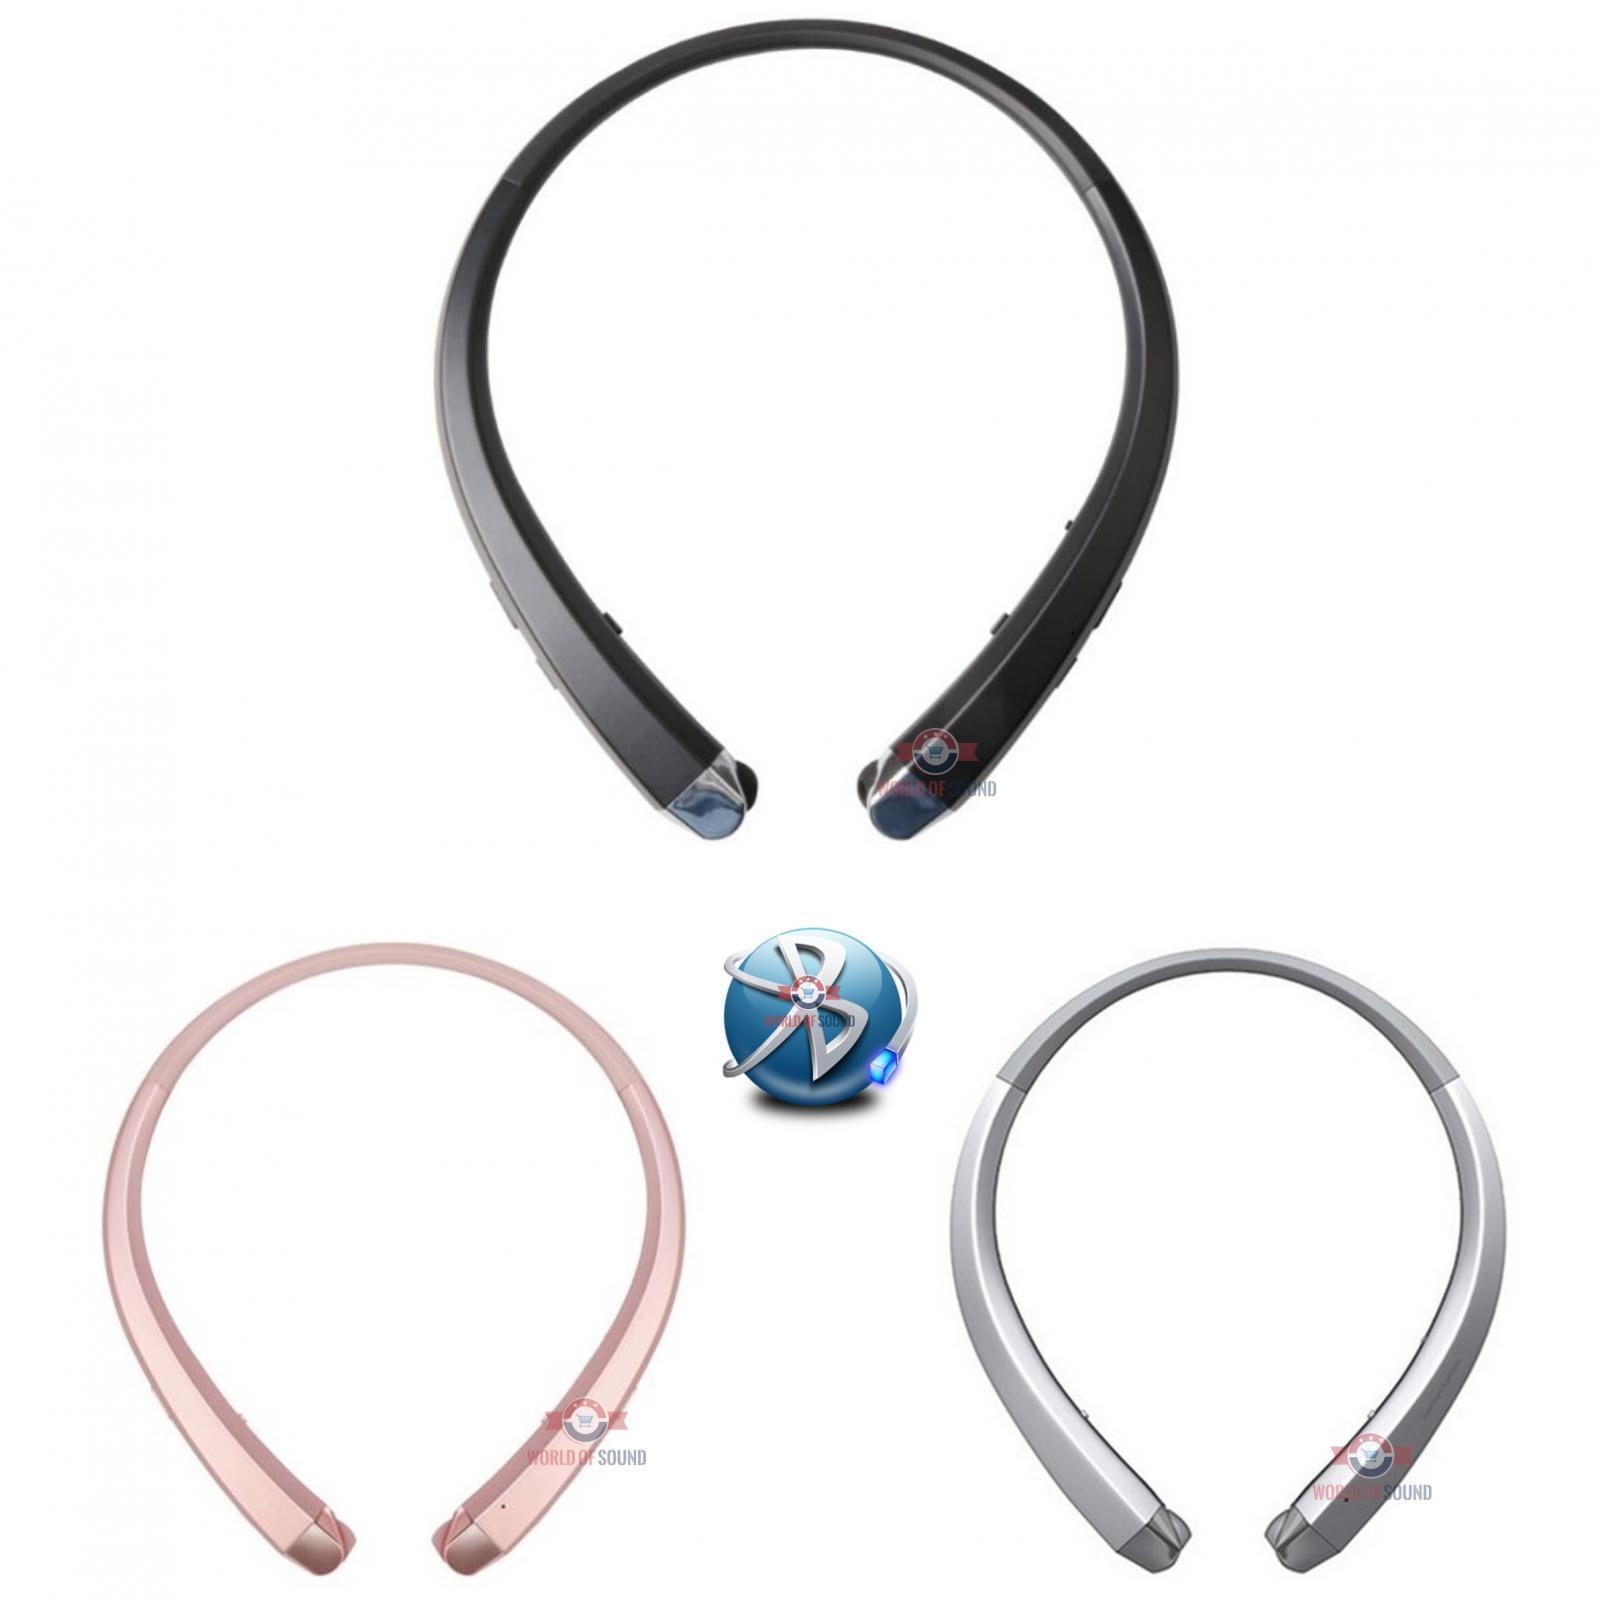 Bluetooth Wireless Headset Stereo Headphone Earphone For Apple LG Samsung  Unbranded Does Not Apply